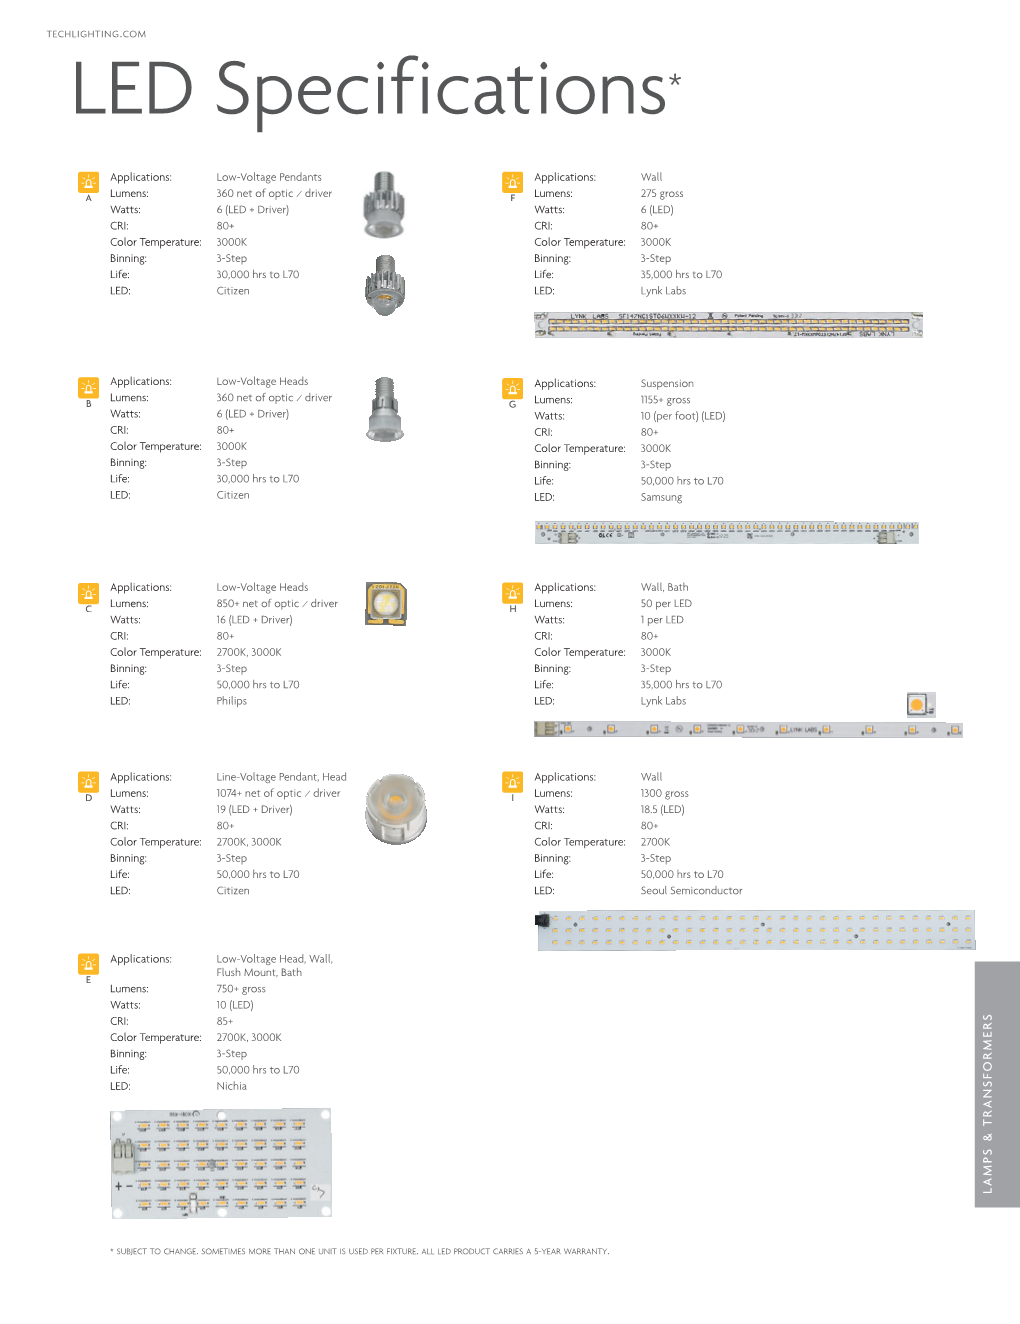 LED Specifications*